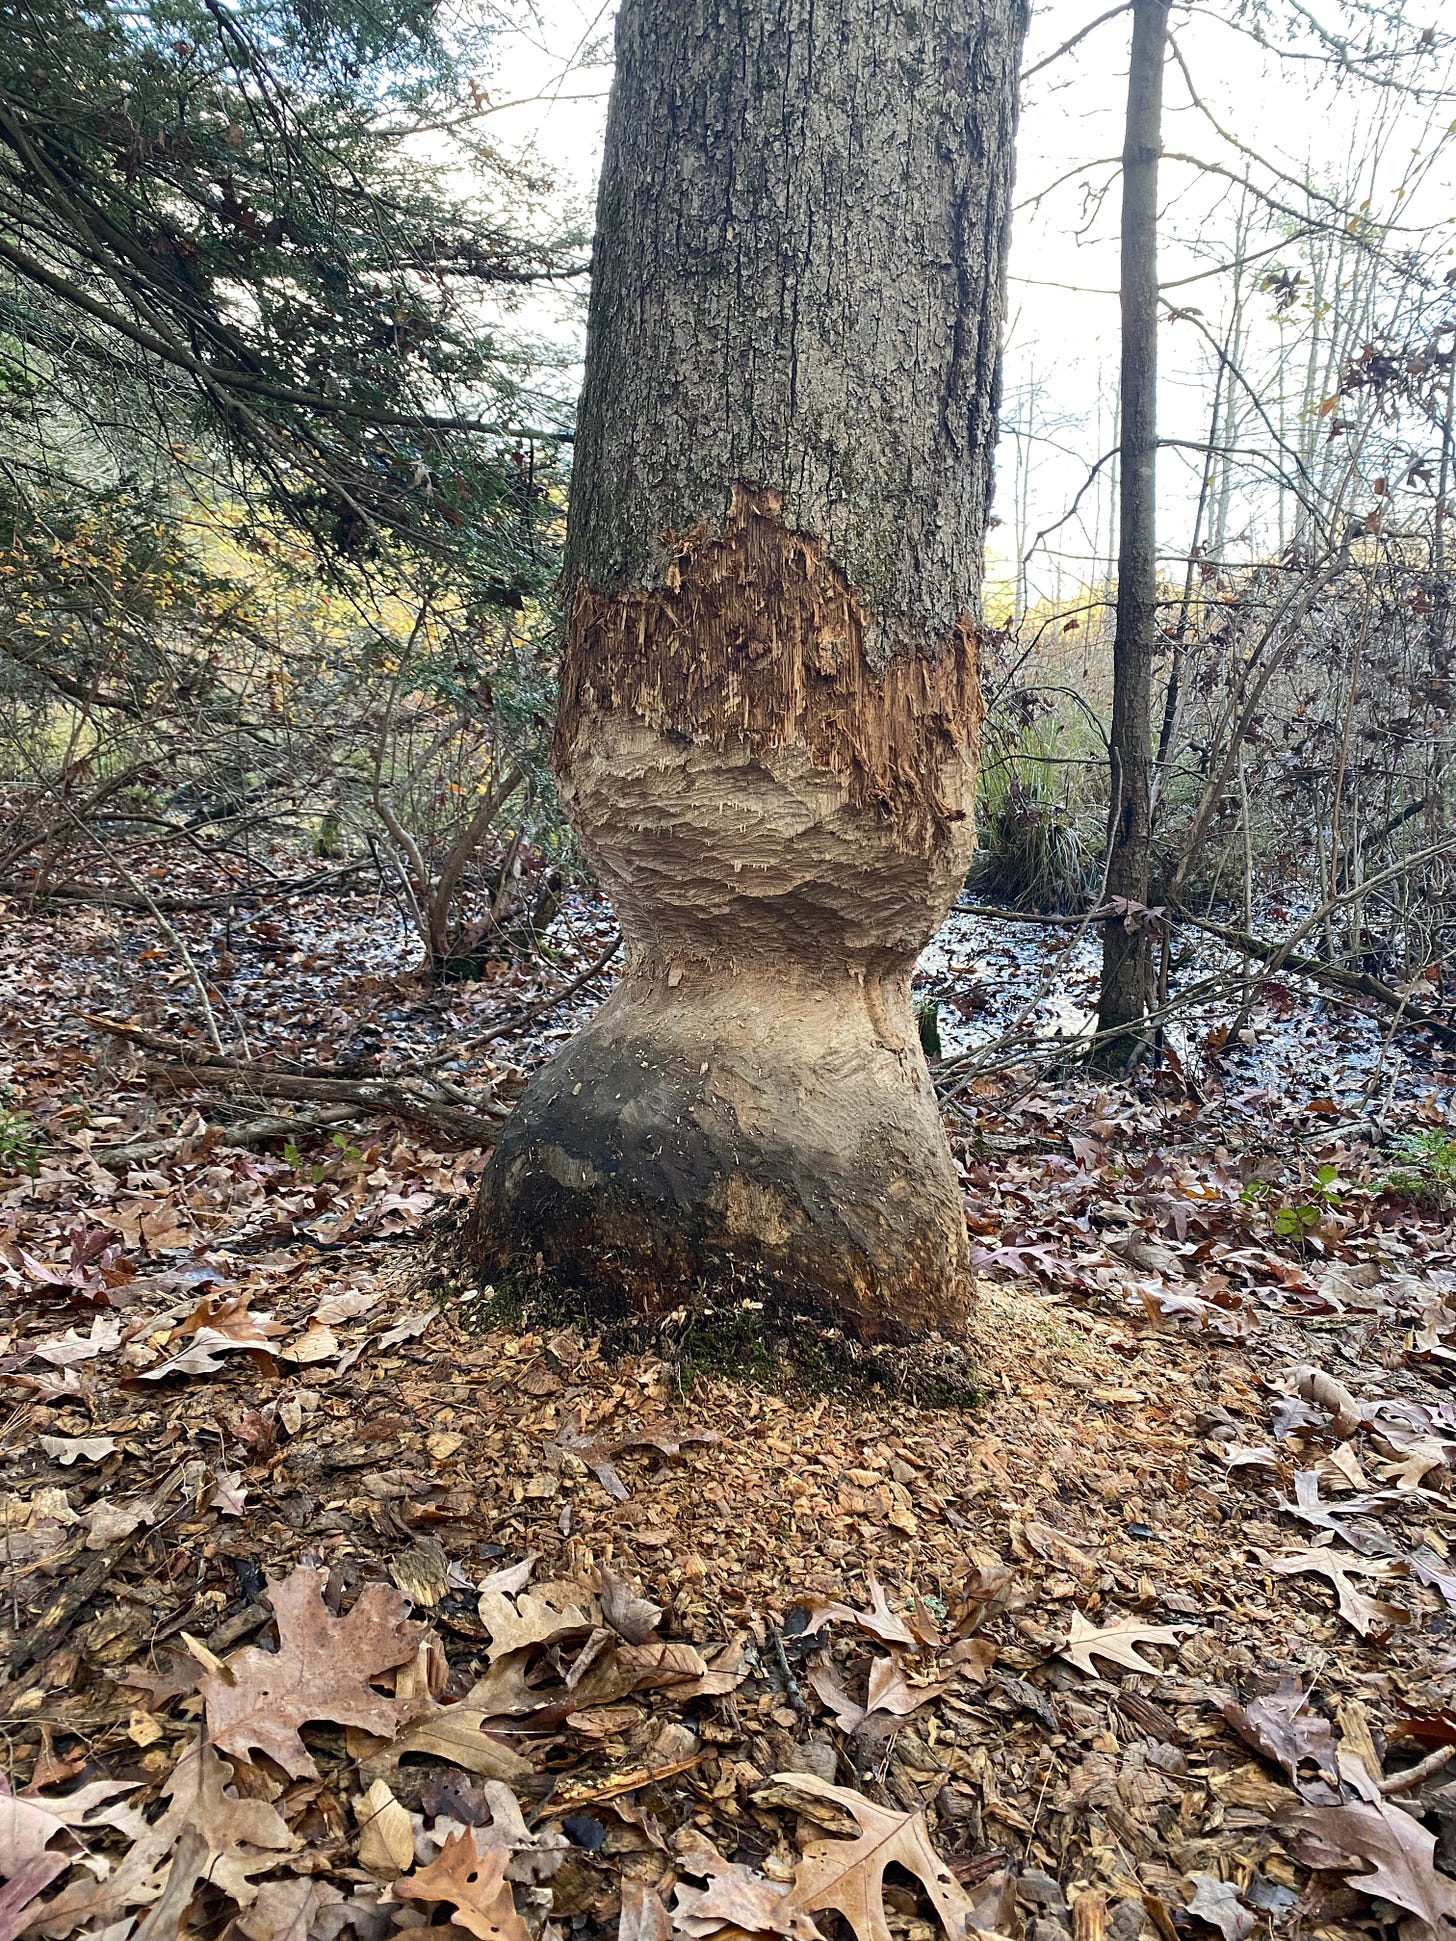 A tree partially chewed by beavers.